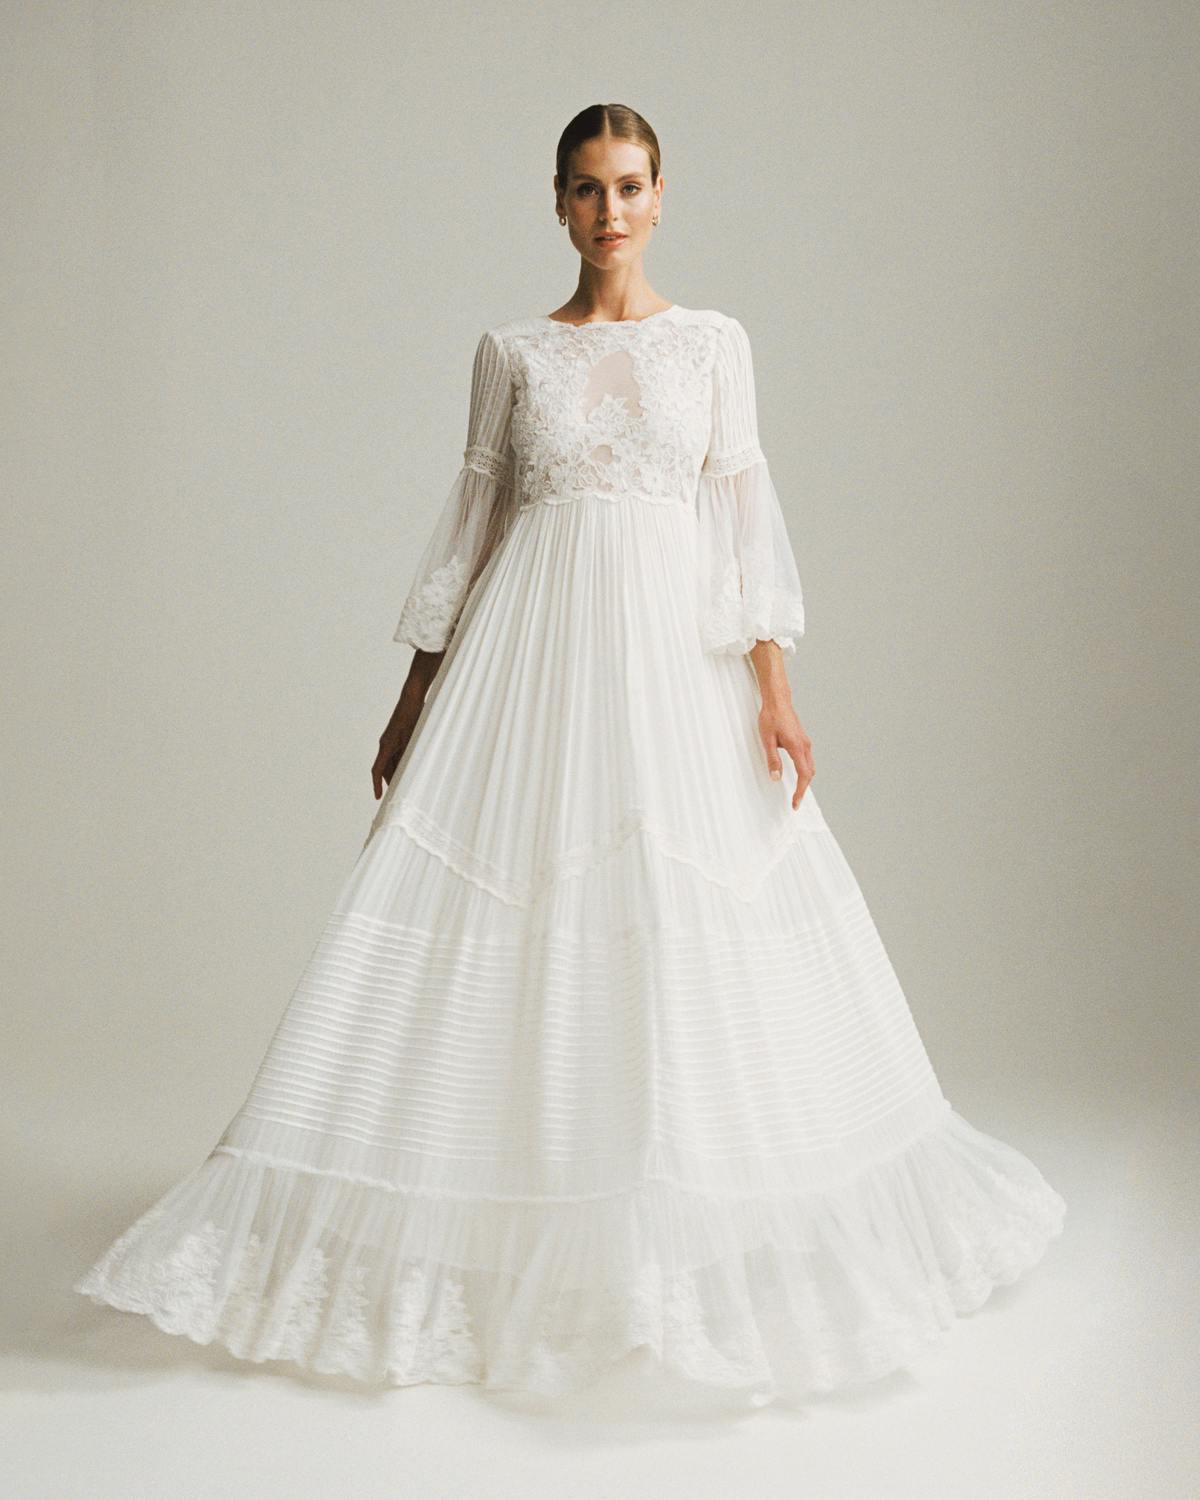 The Bridal Gown, Vintage White. Image #1